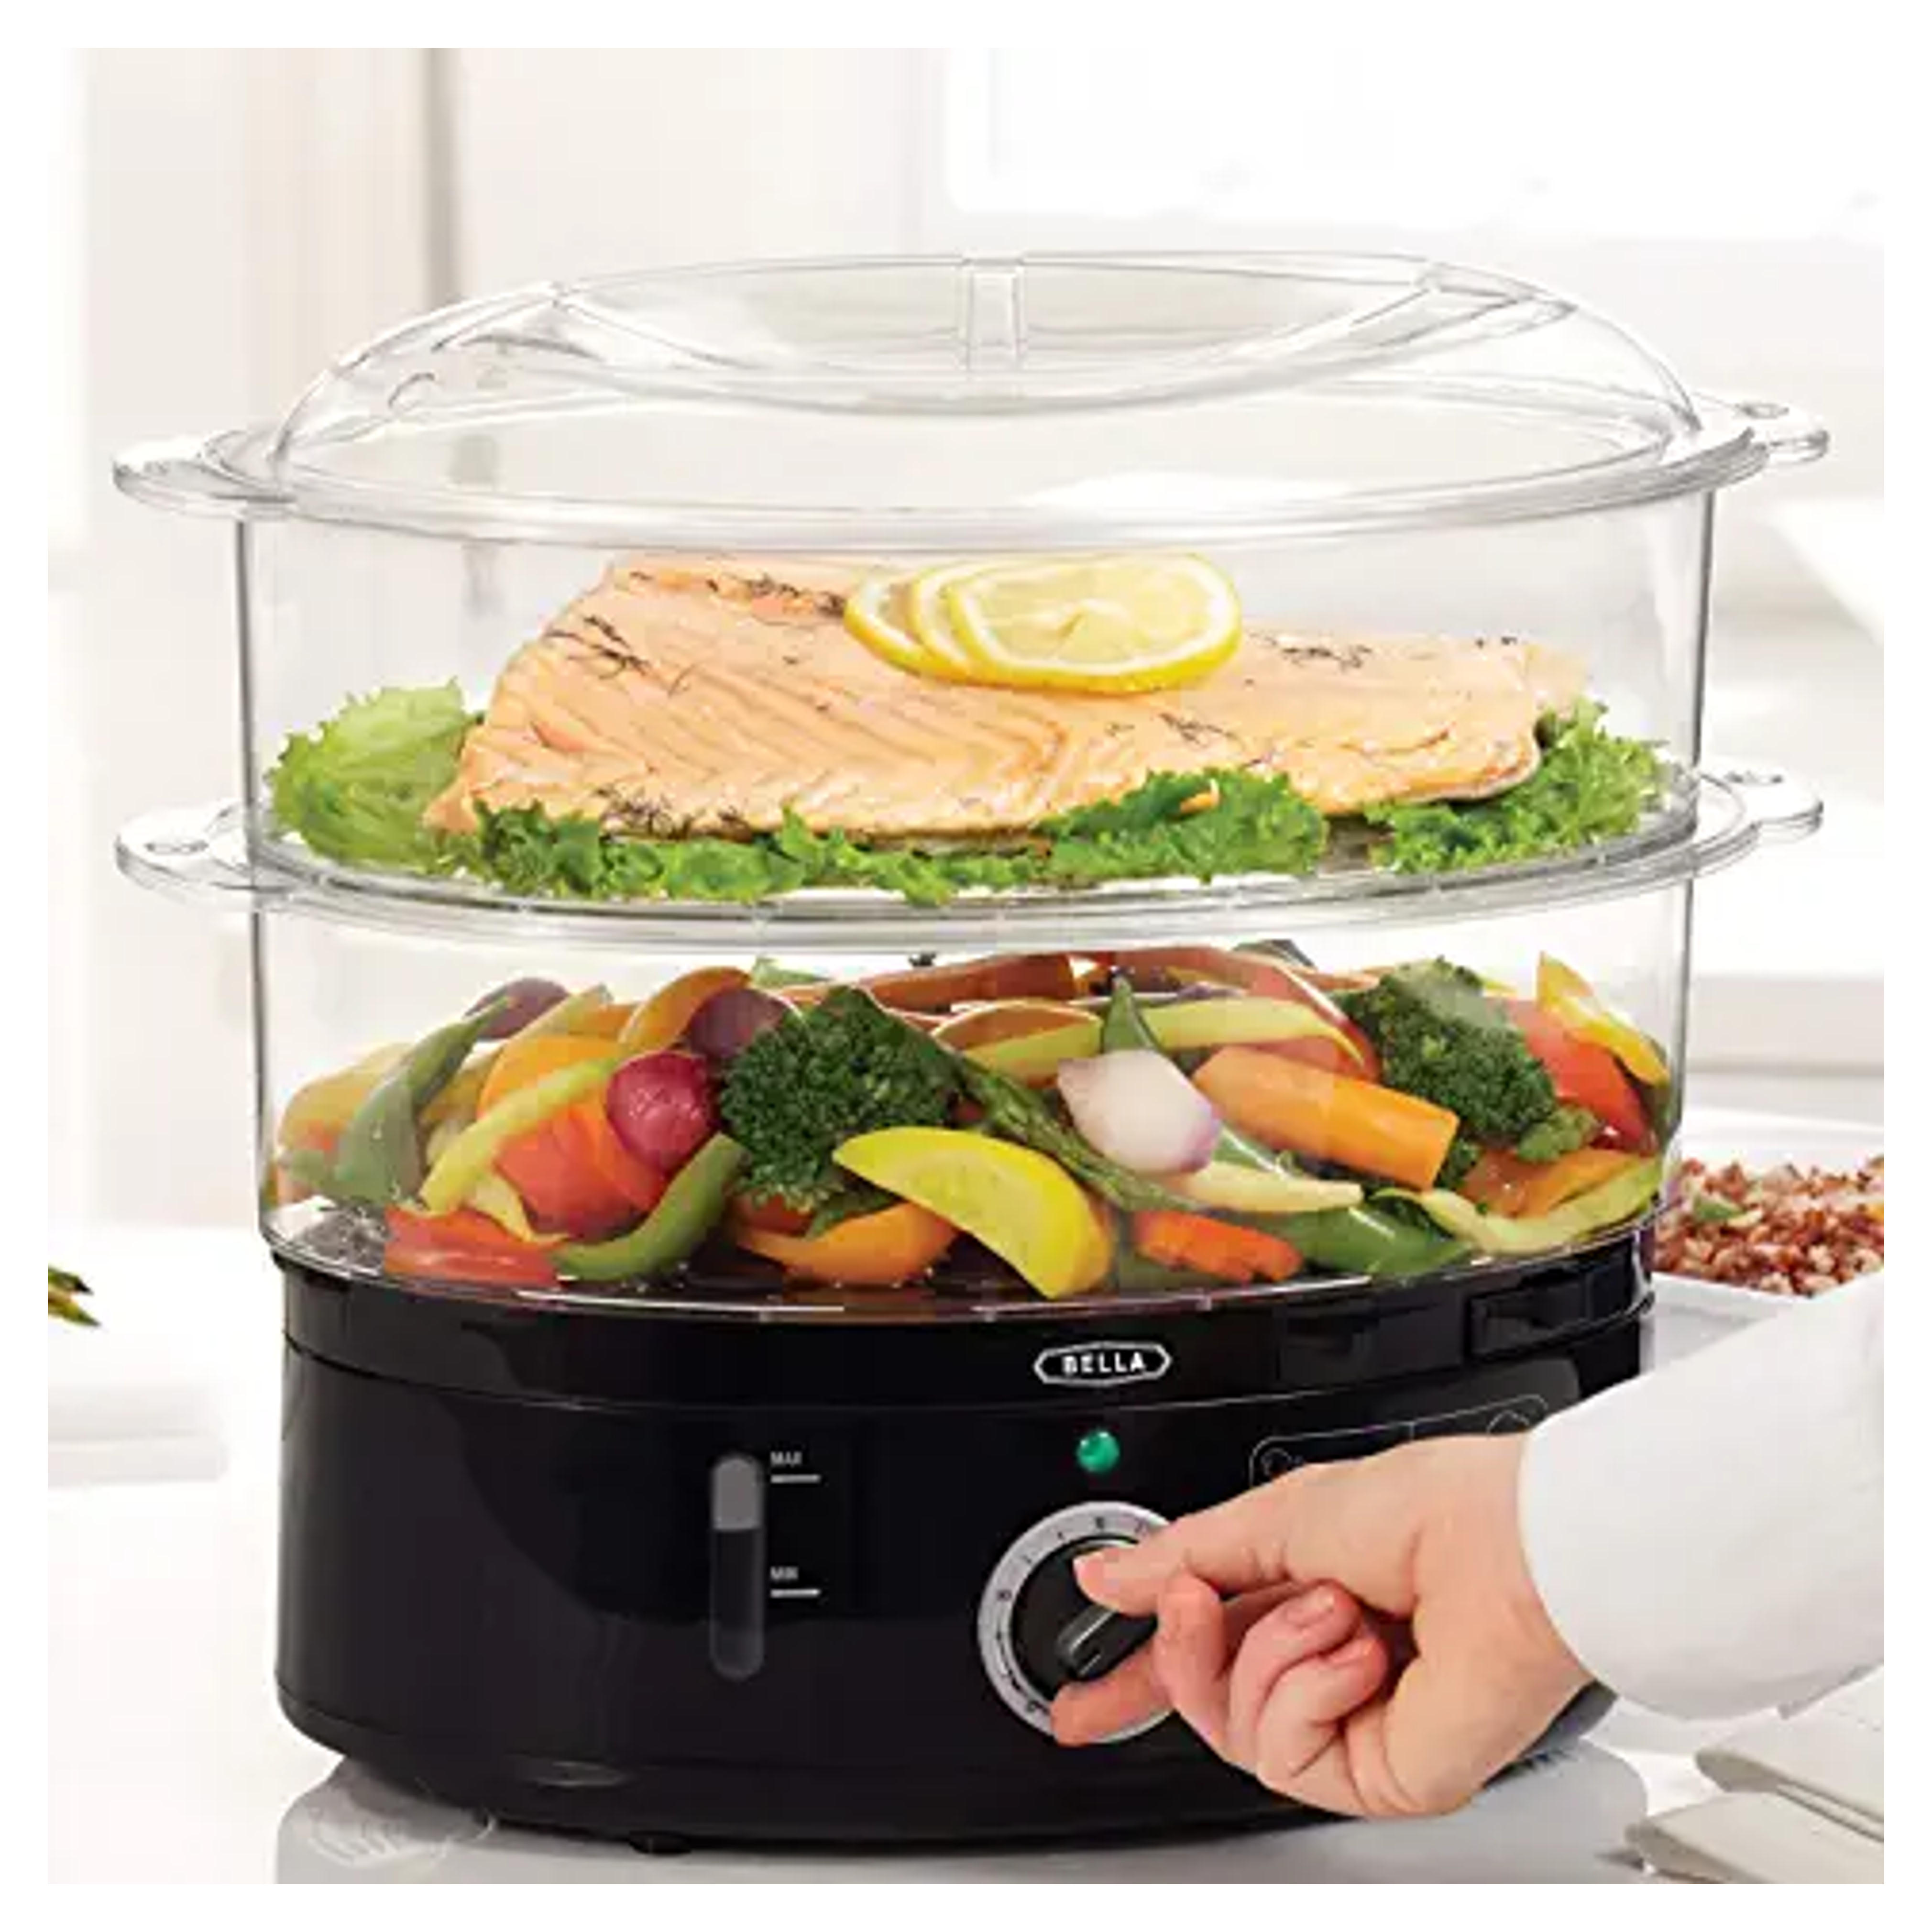 Amazon.com: BELLA Two Tier Food Steamer, Healthy, Fast Simultaneous Cooking, Stackable Baskets for Vegetables or Meats, Rice/Grains Tray, Auto Shutoff & Boil Dry Protection, 7.4 QT, Black : Everything Else